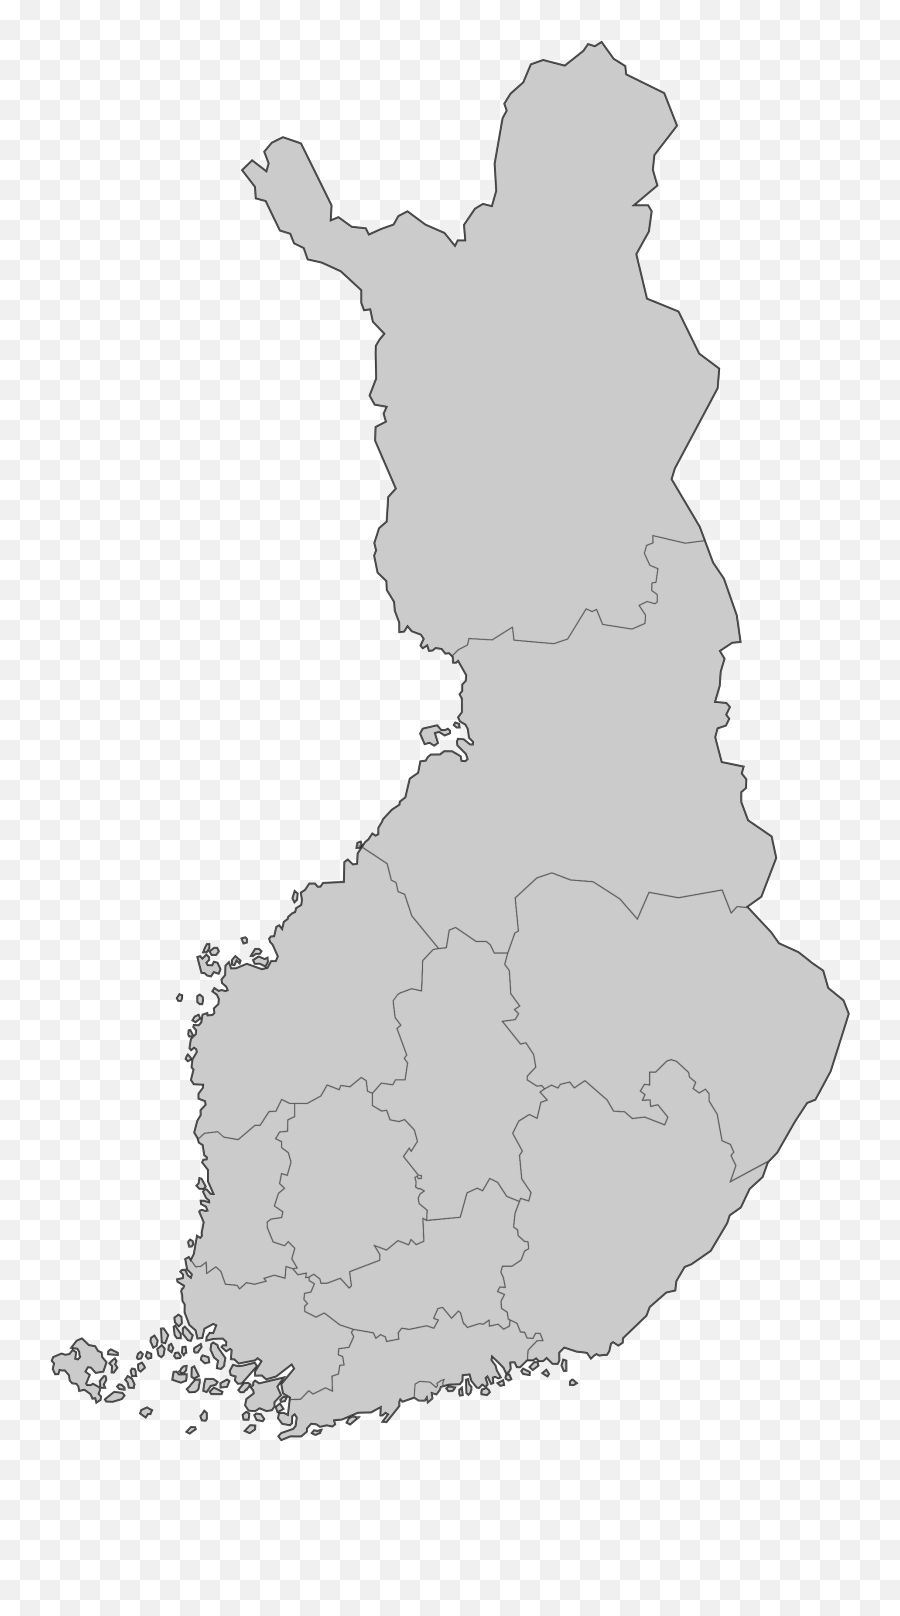 Filefinland Election Map Blankpng - Wikimedia Commons Finland Main Cities,Blank Image Png